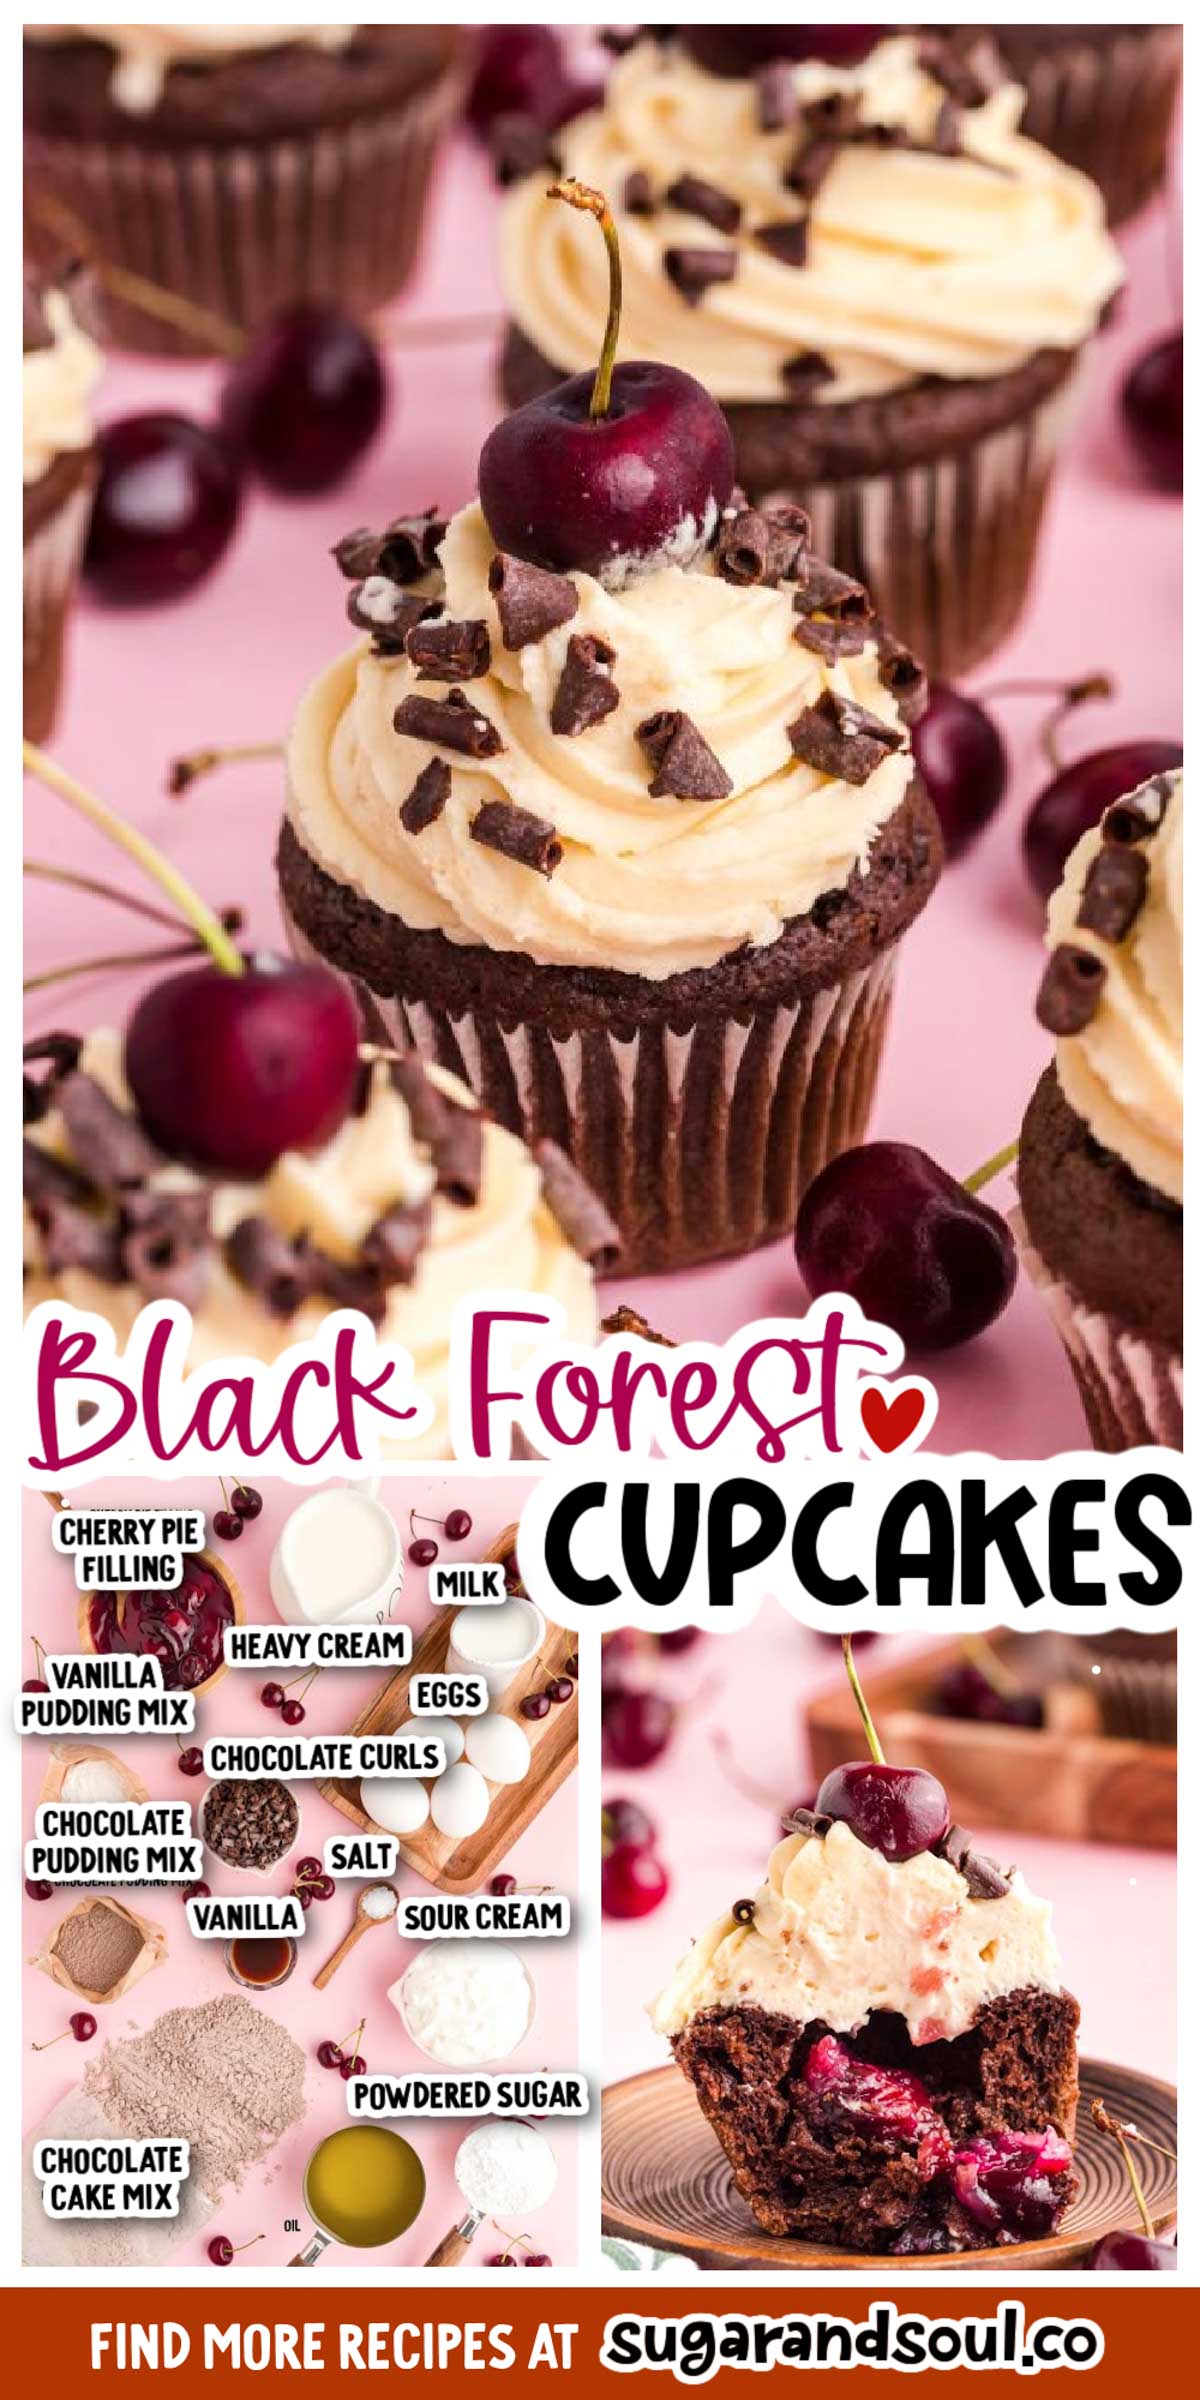 These Black Forest Cupcakes are made with a doctored chocolate cake mix then filled with cherry filling and topped with whipped vanilla cream frosting for a delightfully sweet treat perfect for any occasion!  via @sugarandsoulco